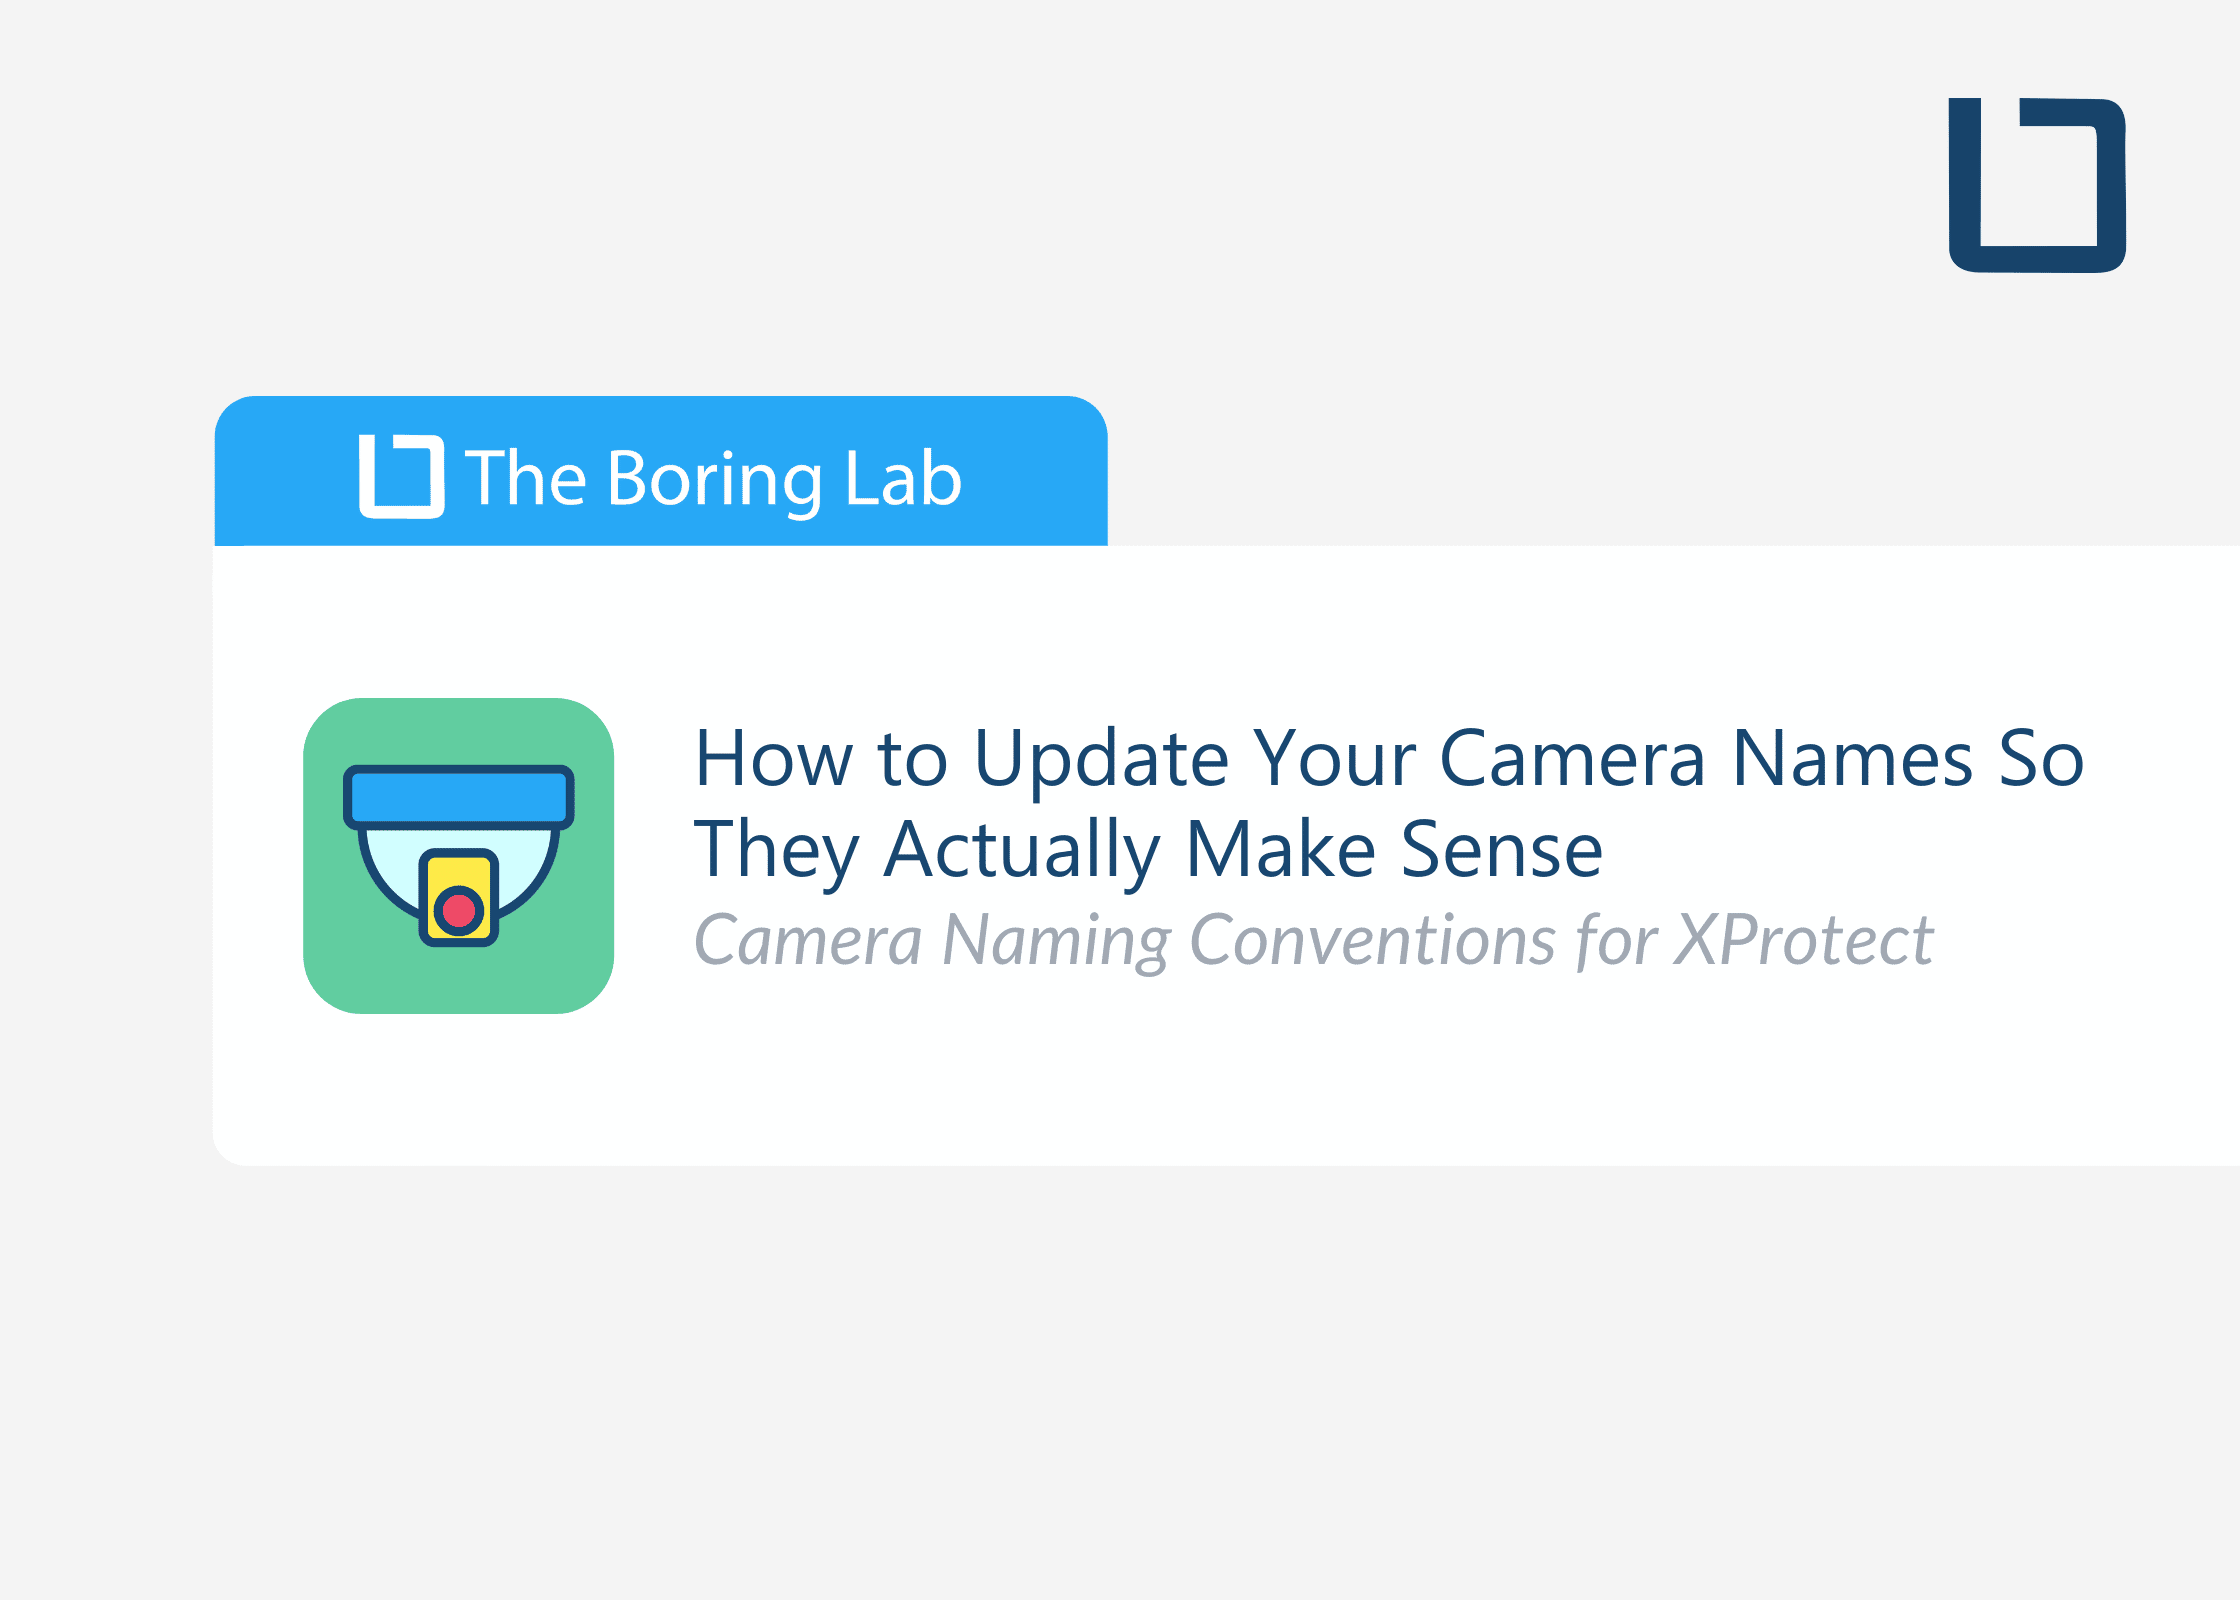 How to Update Your Camera Names So They Actually Make Sense